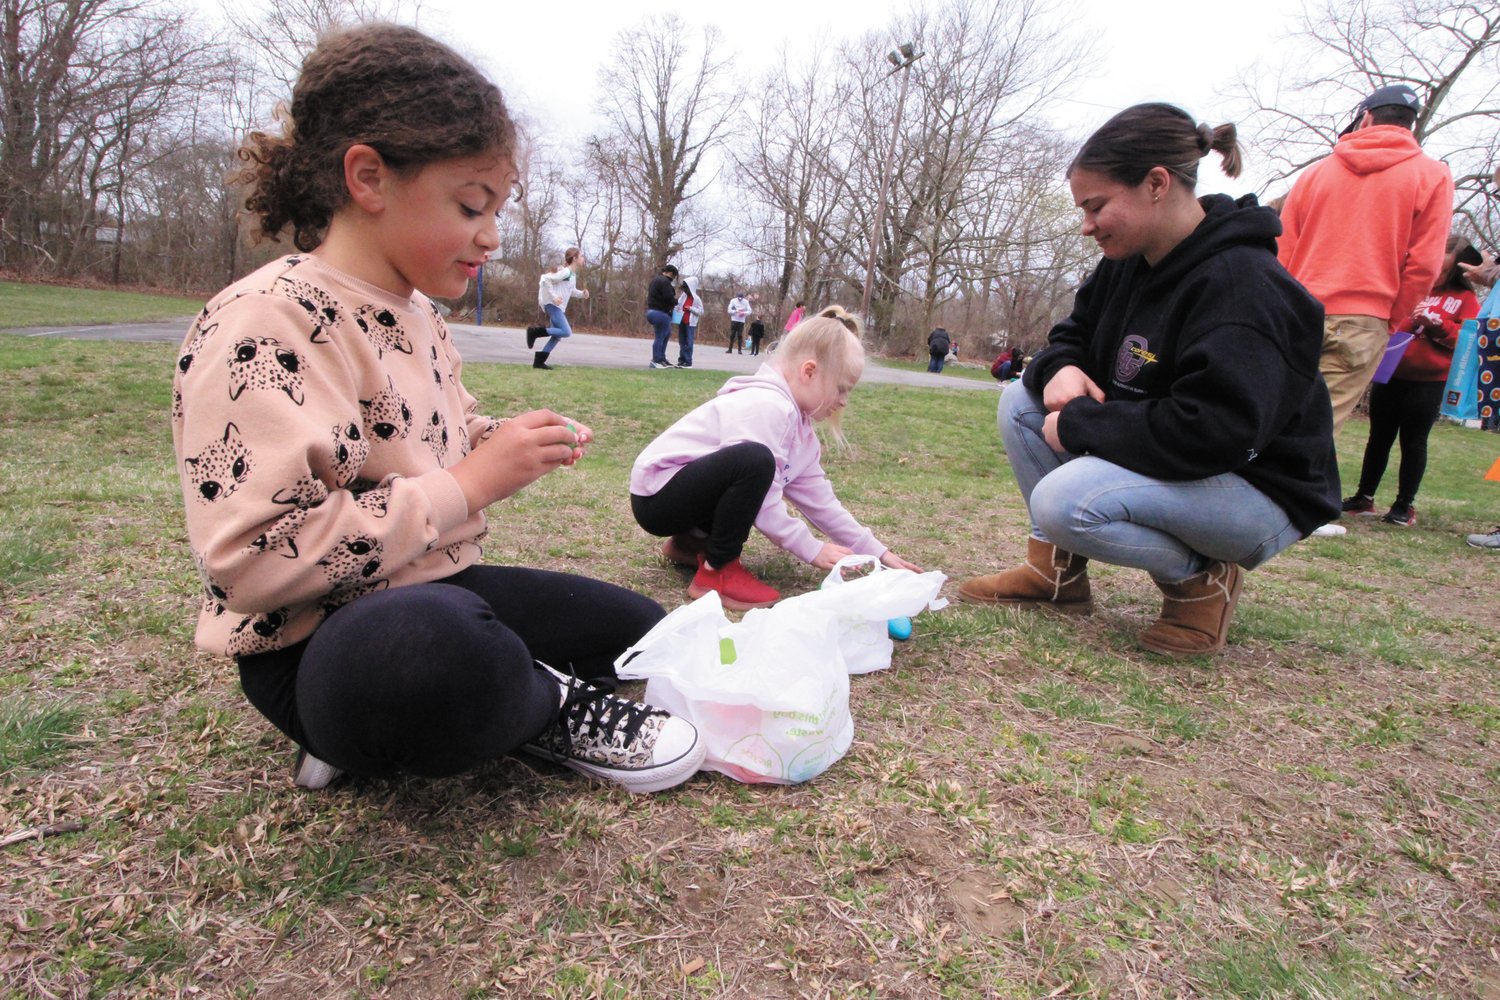 HUNTING FOR NUMBERS: Sophie Hazelwood-Chase and Emily MacInosh look for numbers in the eggs they retrieved as Paige McCoy looks on.   